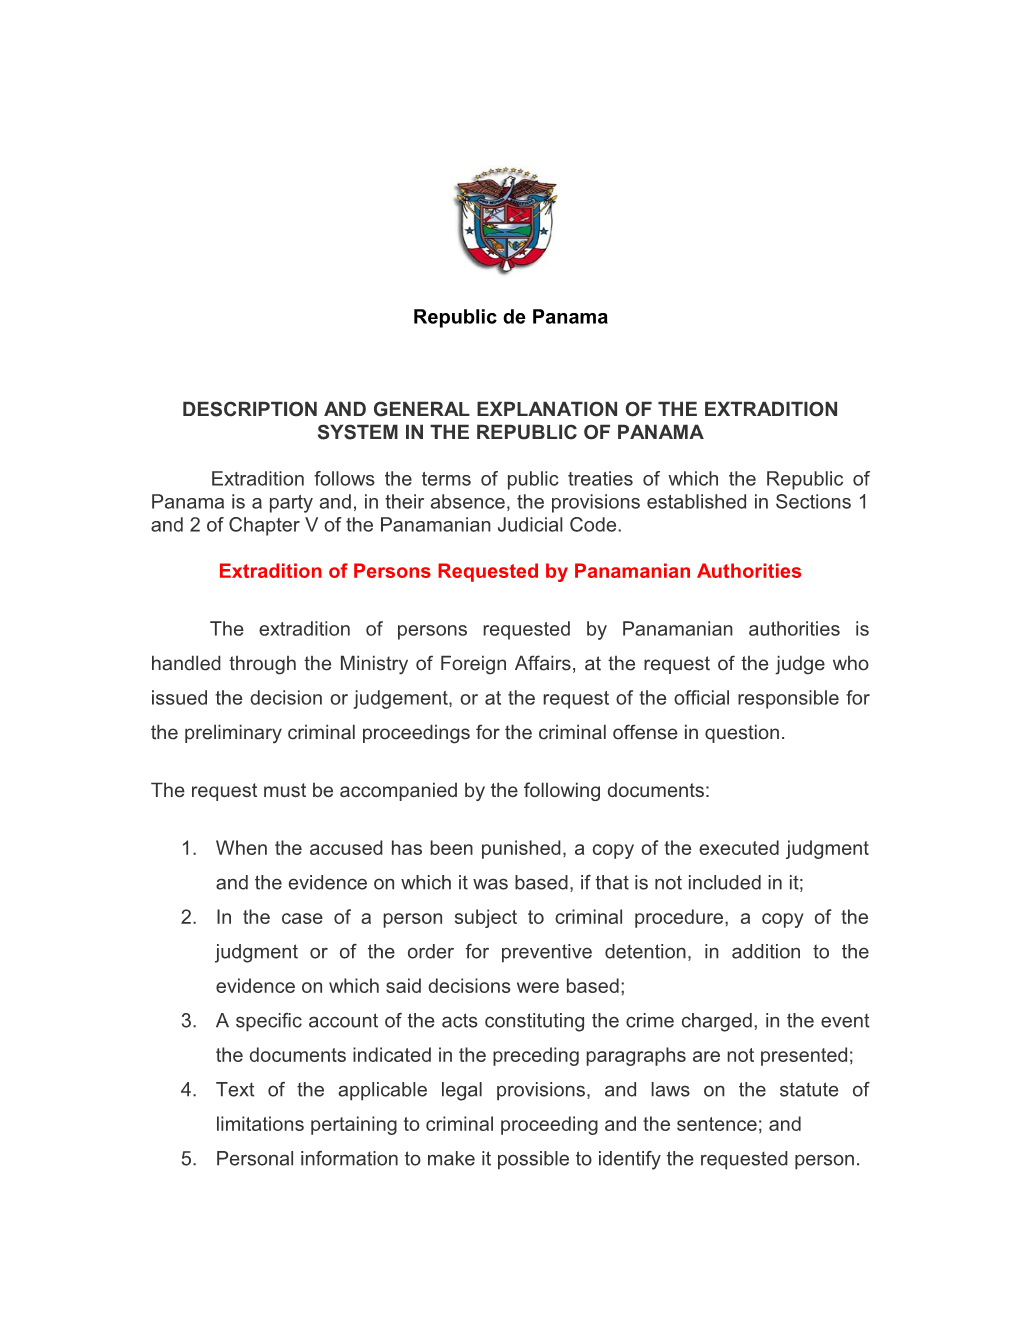 Description and General Explanation of the Extradition System in the Republic of Panama